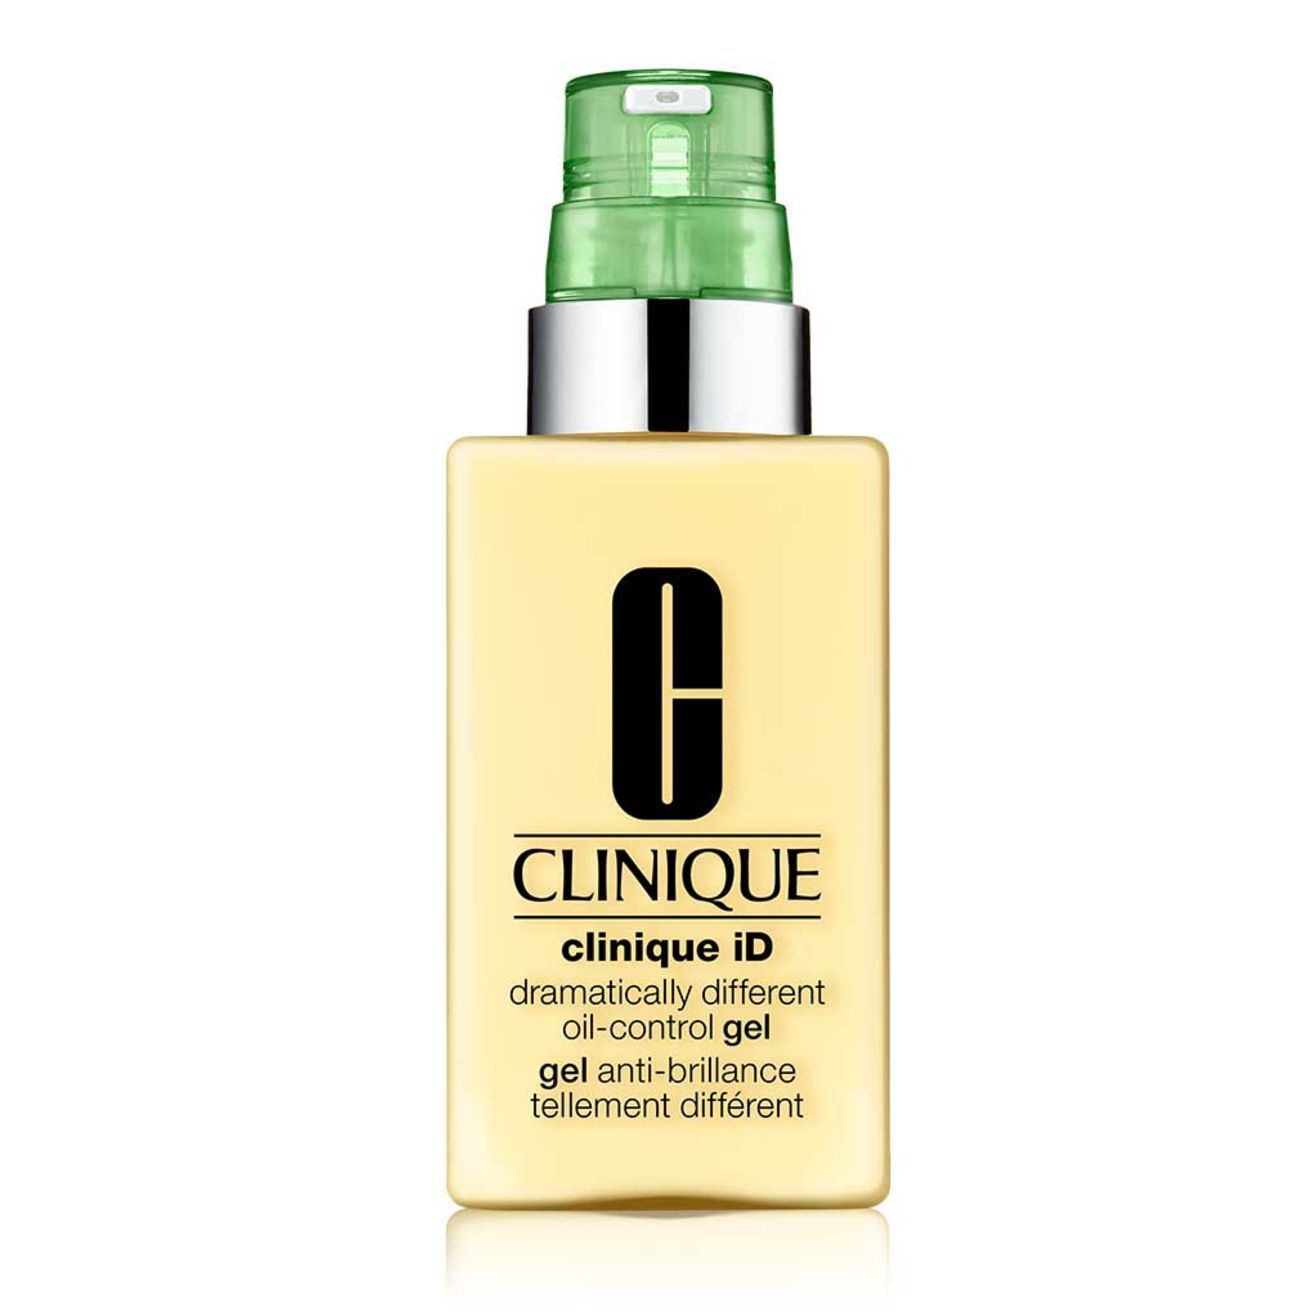 Clinique iD Dramatically Different Oil-Control Gel + Active Cartridge Concentrate For Delicate Skin